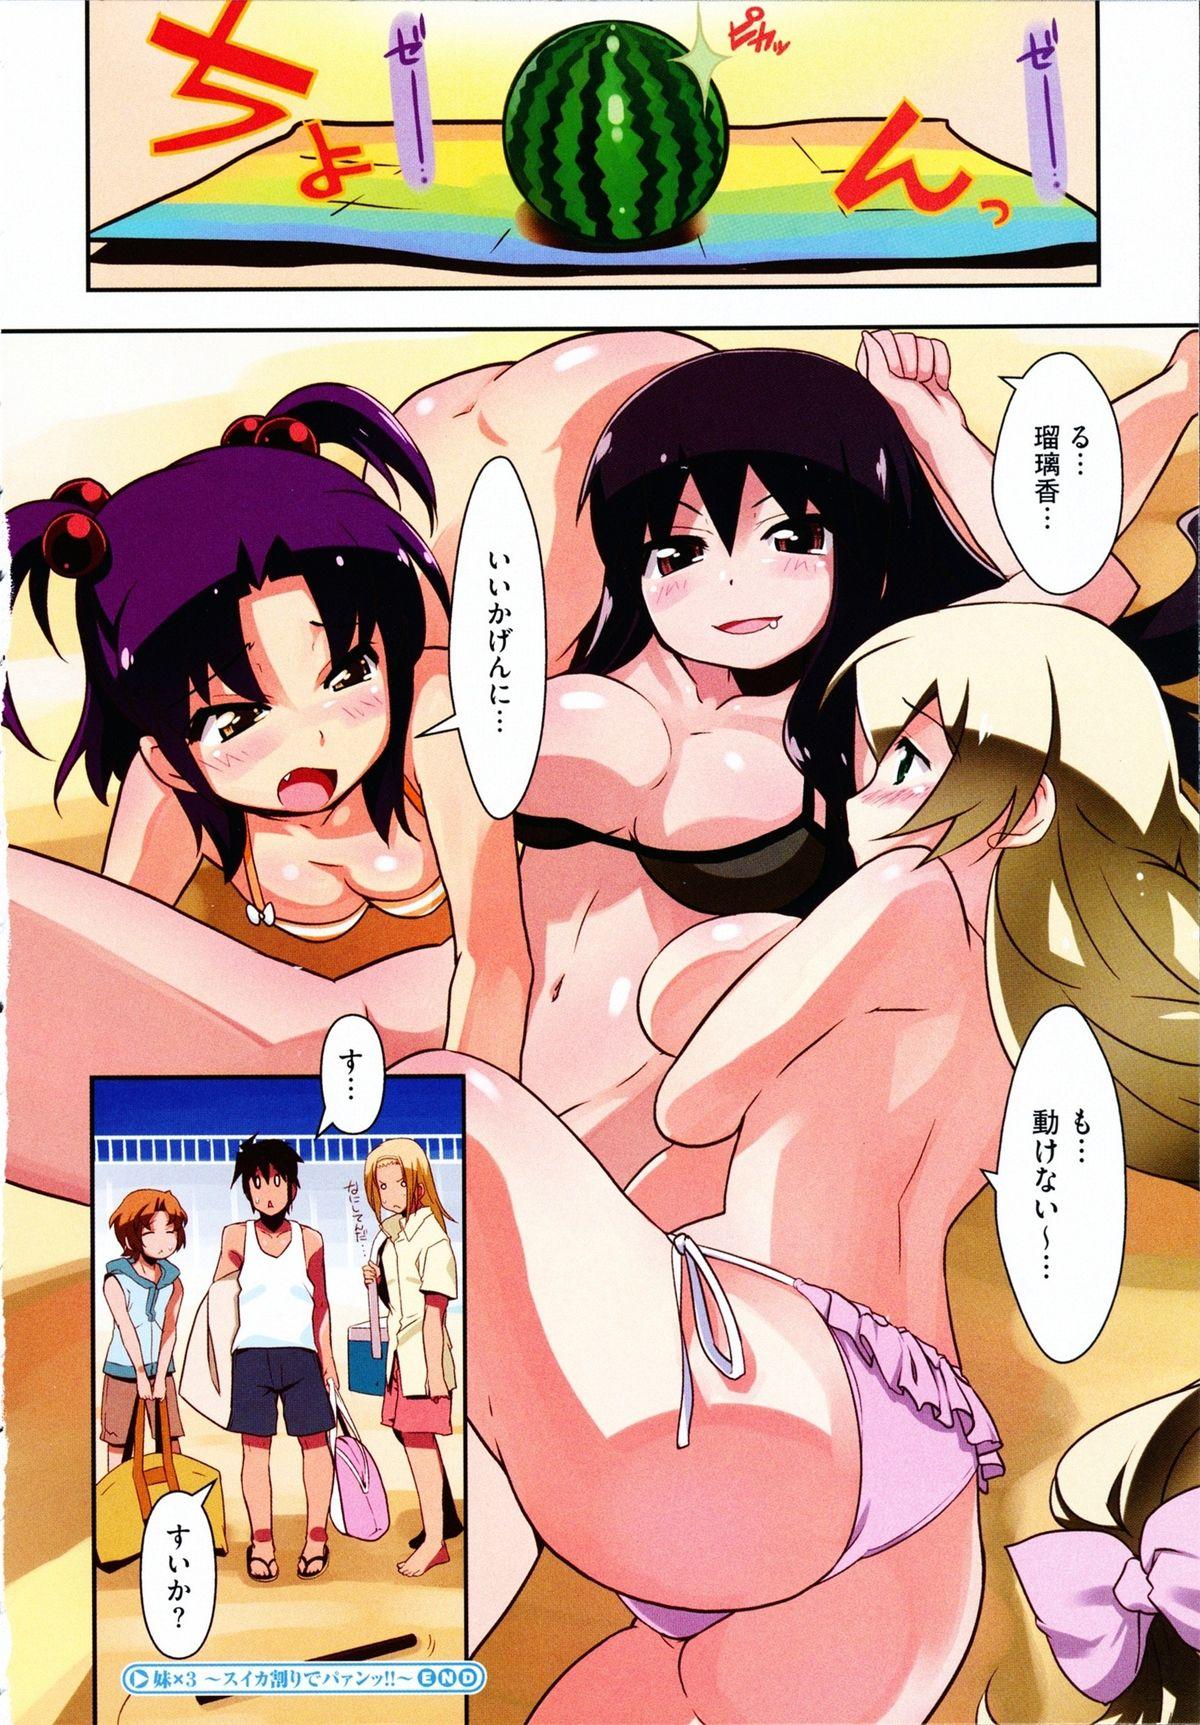 Gay 3some Imouto x 3 Seduction Porn - Page 10